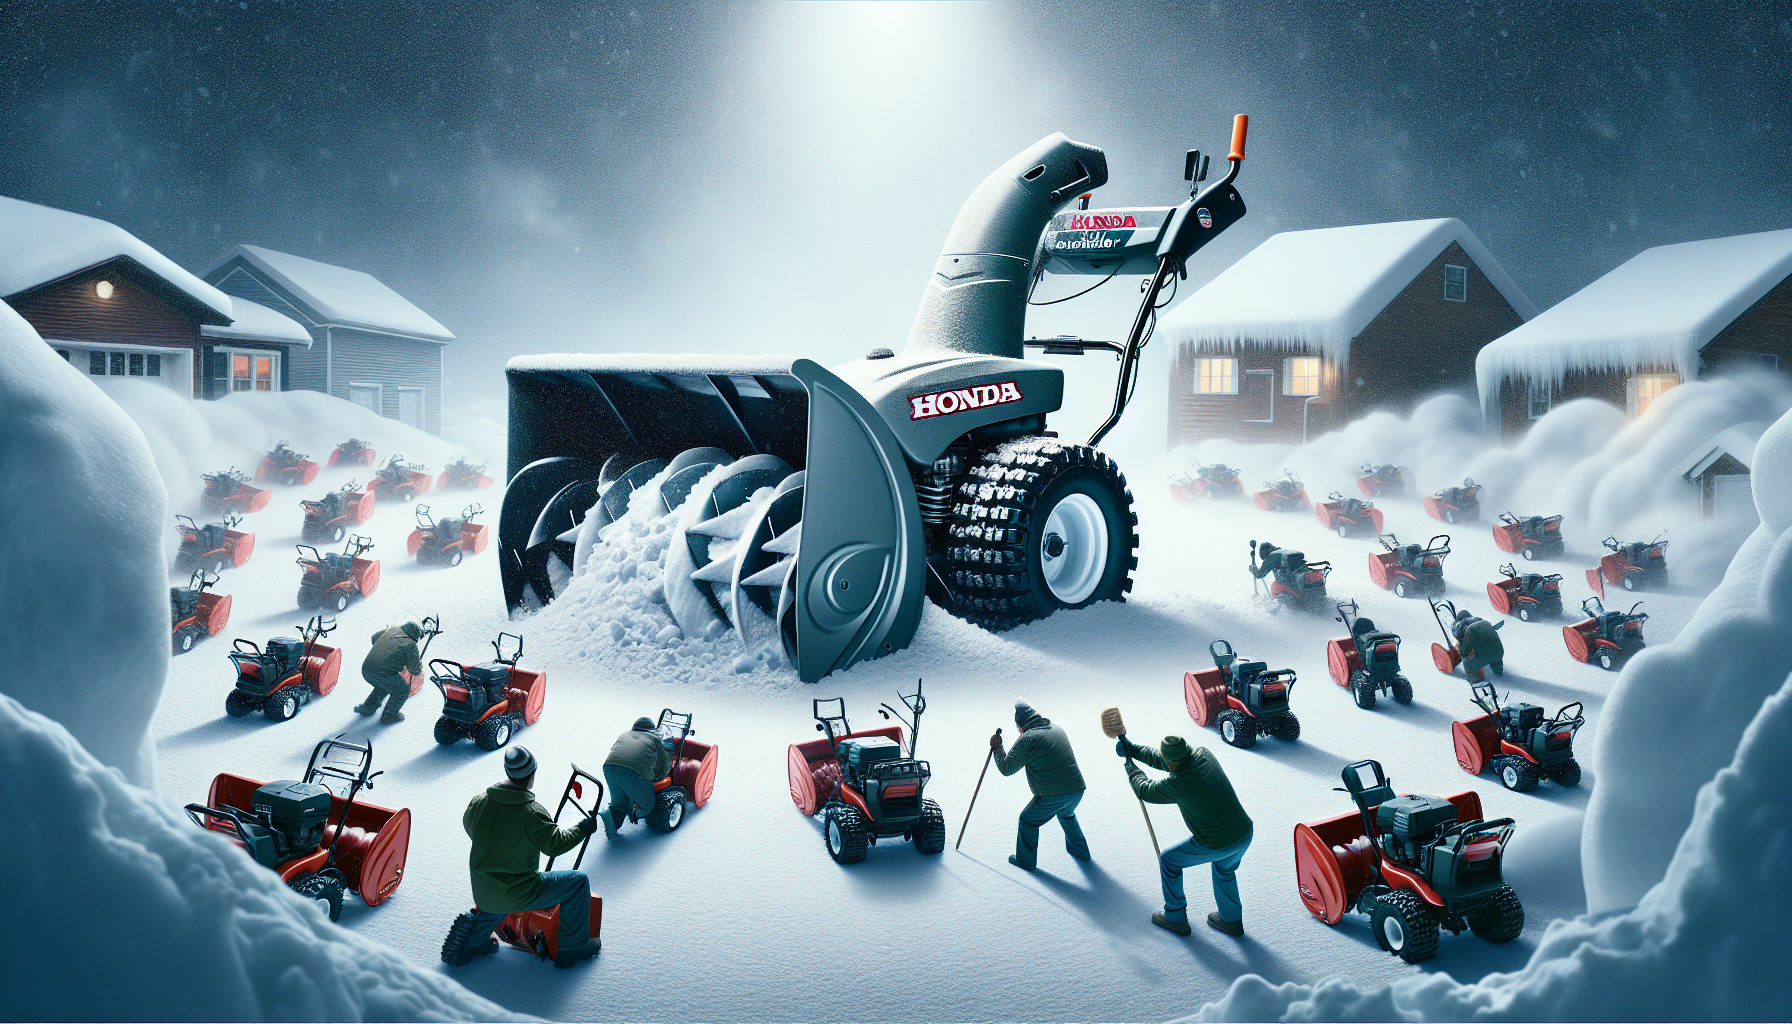 Why Are Honda Snowblowers The Best?